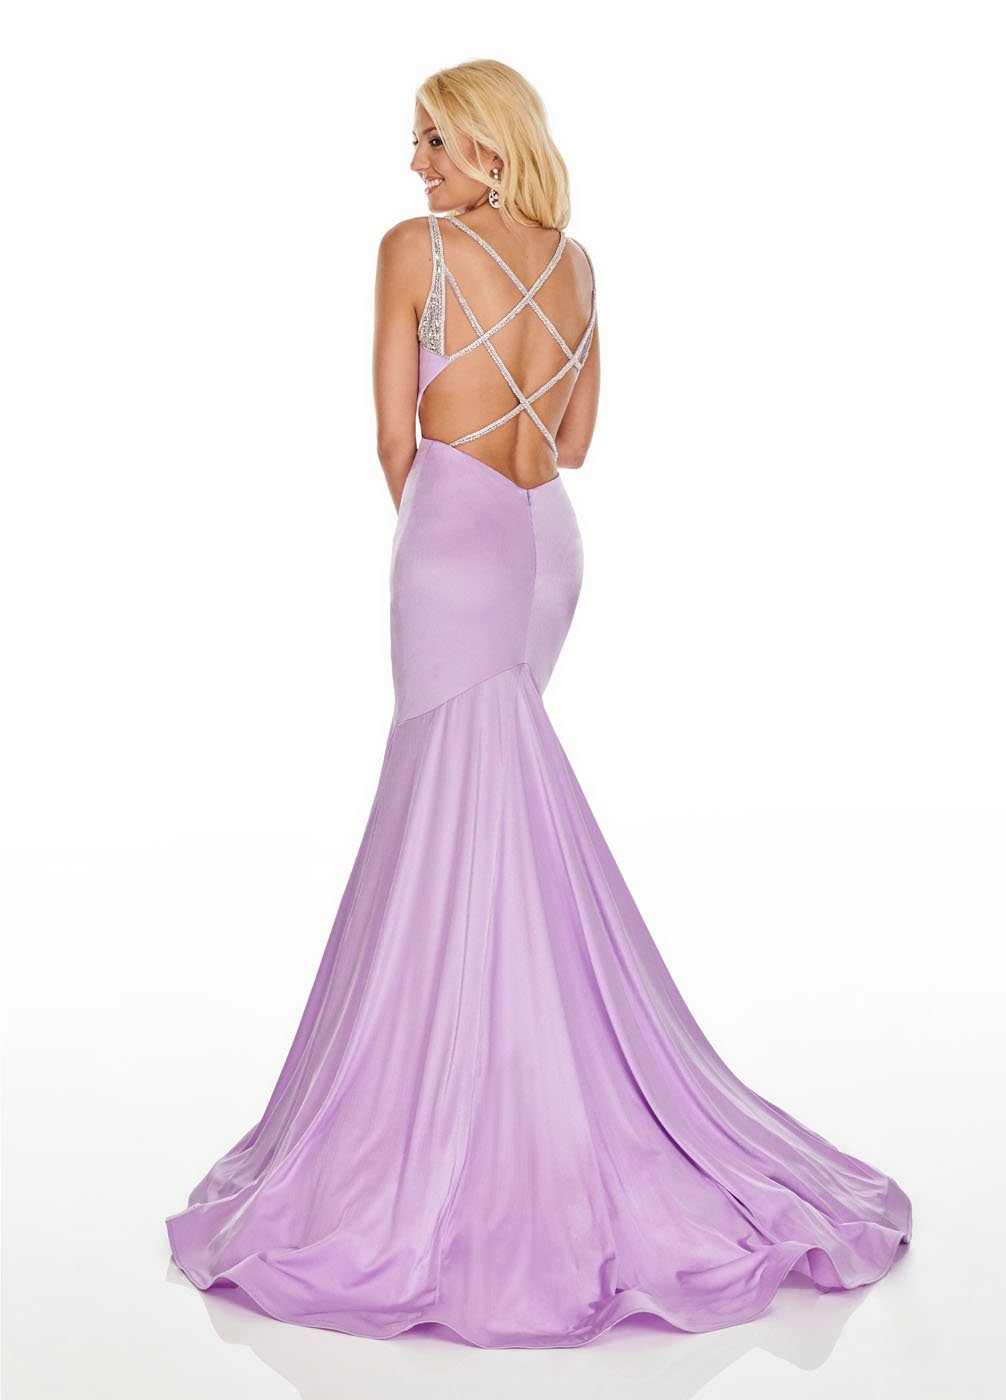 Rachel Allan 7042 dress images in these colors: Flamingo, Hot Coral, Lilac, Turquoise.